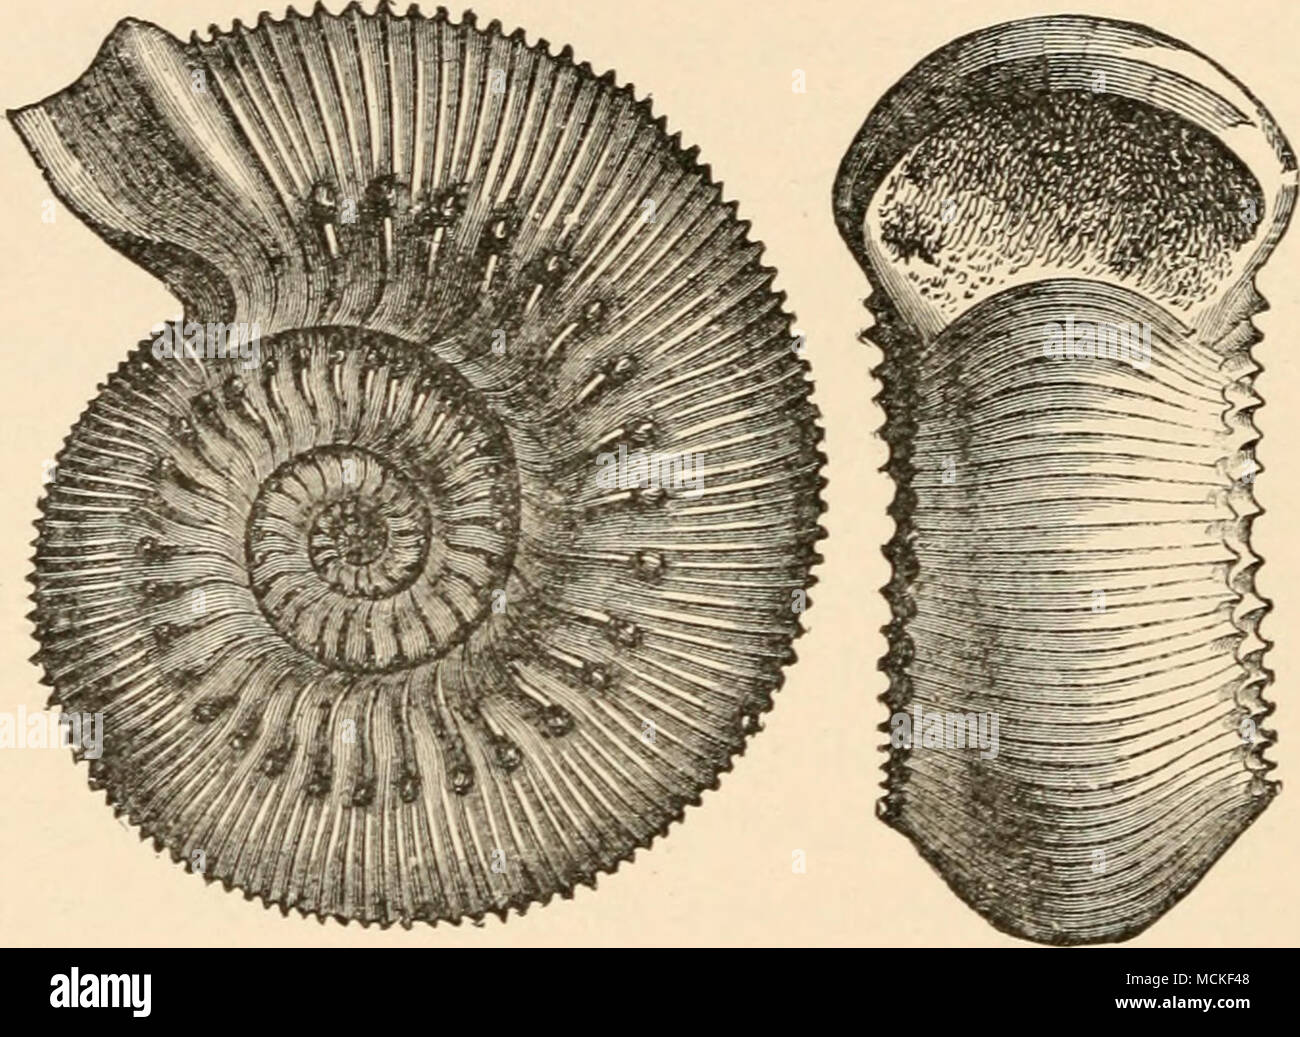 . Fig. 19. Ammoiiiles Huniphresianus. A form analogous to the Planulata. the shell ; that is to say, it gradually takes possession of the central turns also, as we trace the forms to higher strata. This reproduction in younger stages of life of modifications first occurring at a more advanced age, makes but slow progress, so that we see the older forms repeated with great persistency in the central turns. Frequently a modification of this sort has taken posses- sion of only a small part of the convolutions, when a new one already appears at the outside, and follows the Stock Photo